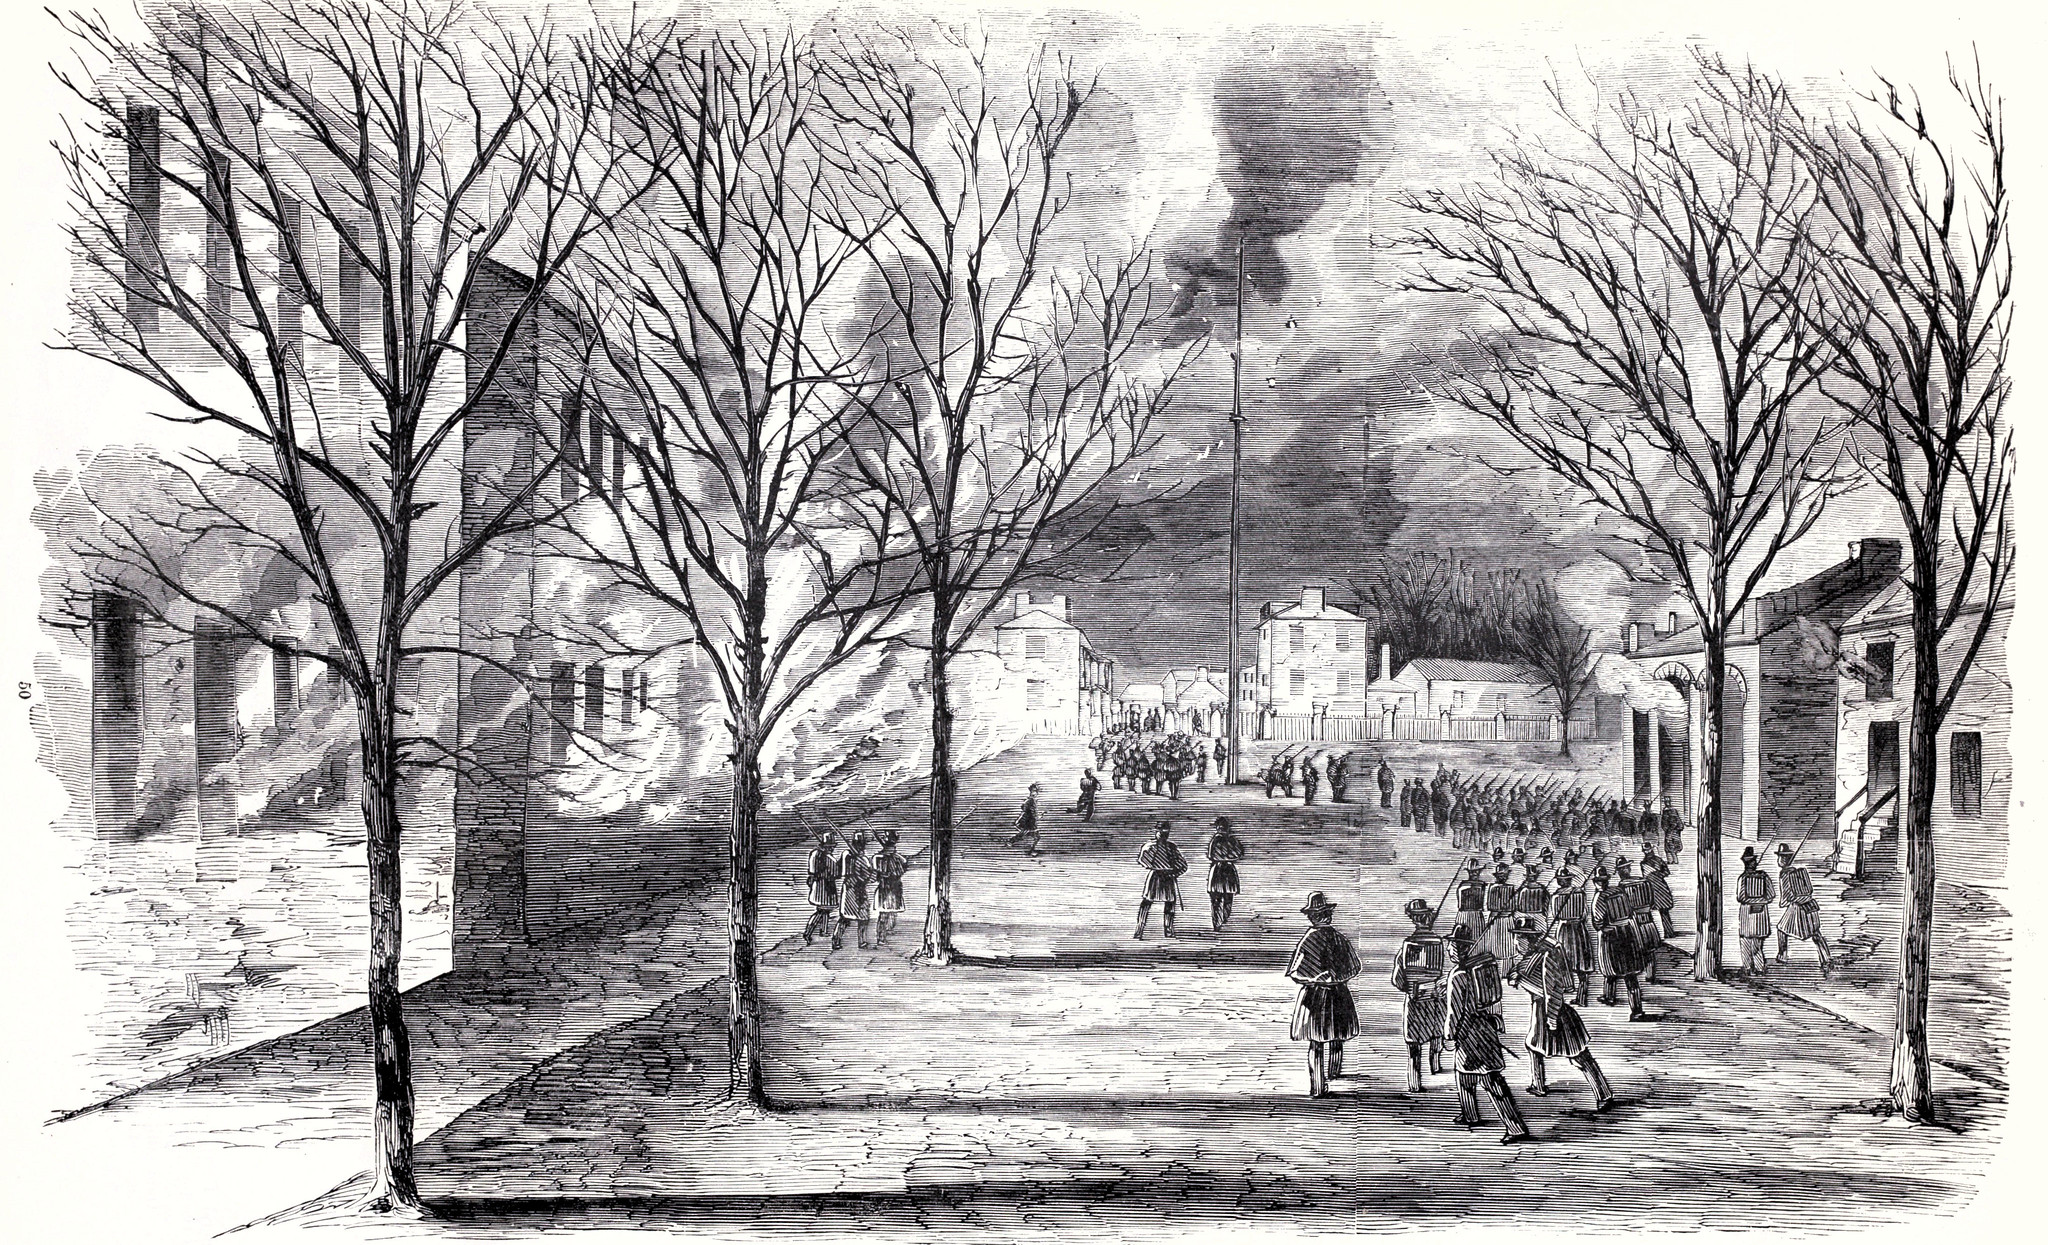 Burning of the United States Arsenal at Harper's Ferry, Va., April 18th, 1861